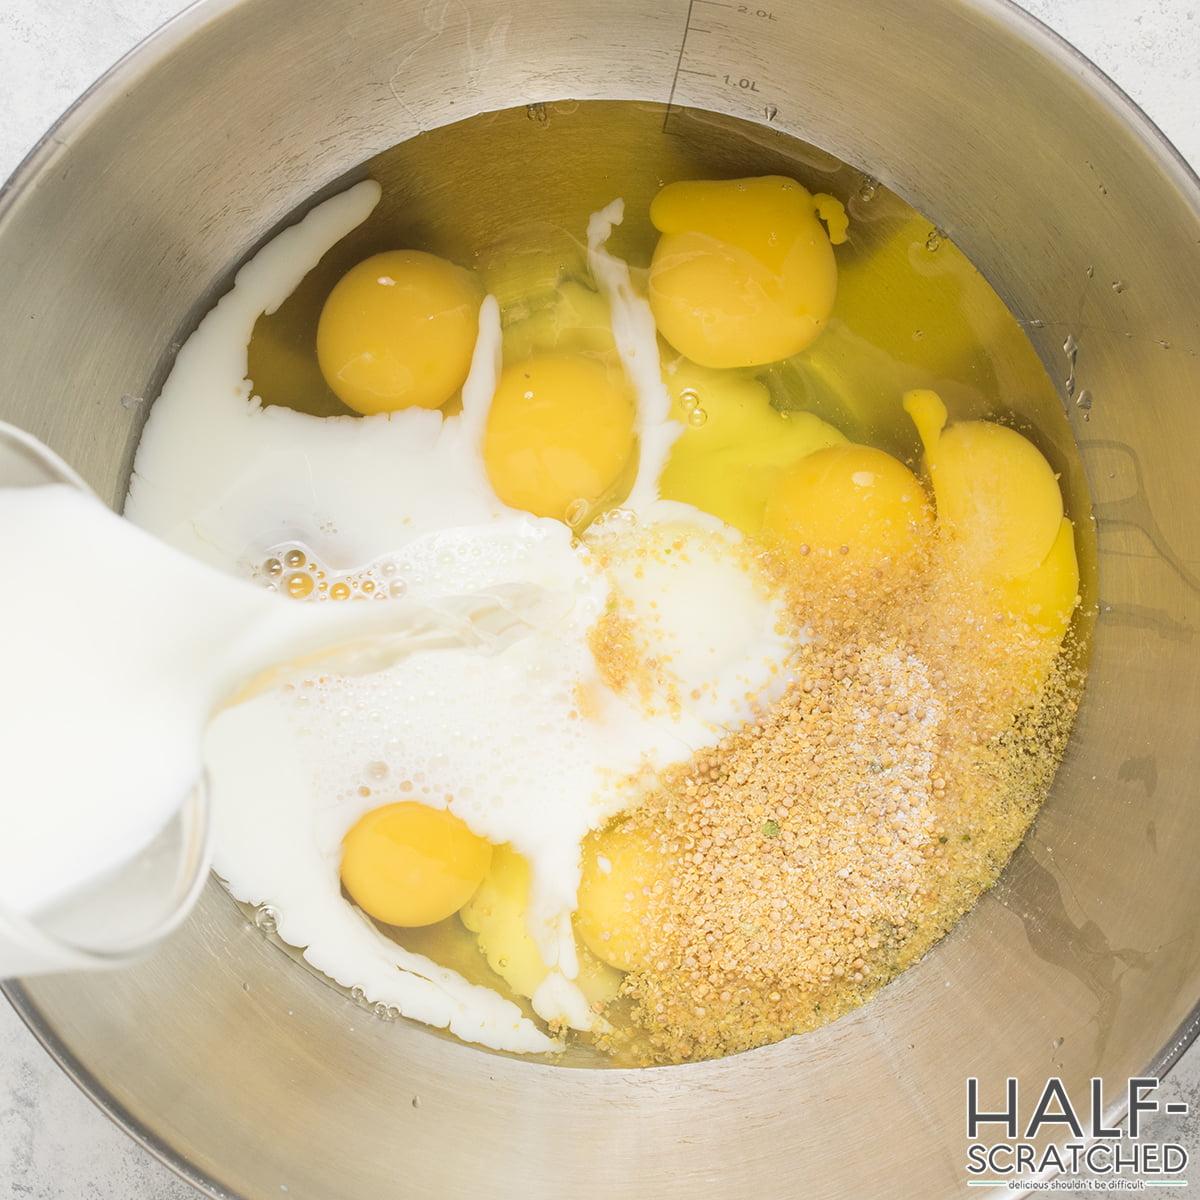 Adding milk in a bowl with eggs and mustard